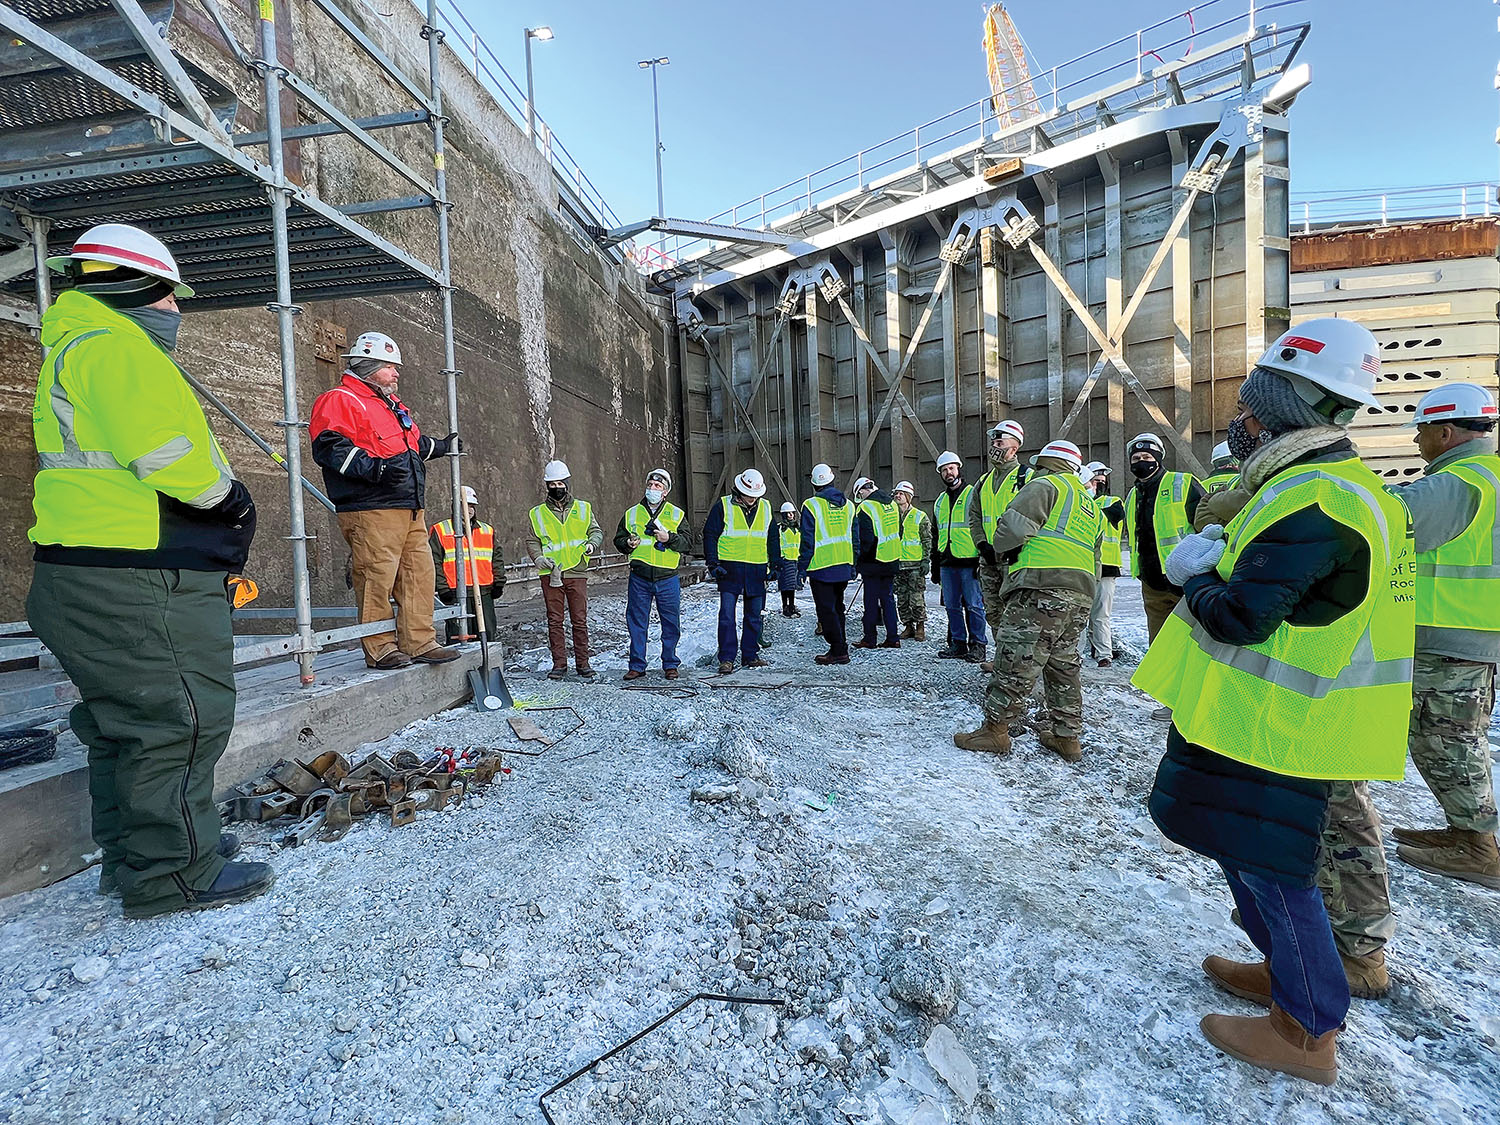 Elected representatives, Corps officials, media and guests stand on the bottom of Lock 15 during a tour January 26. (Photo by Paul Rohde)